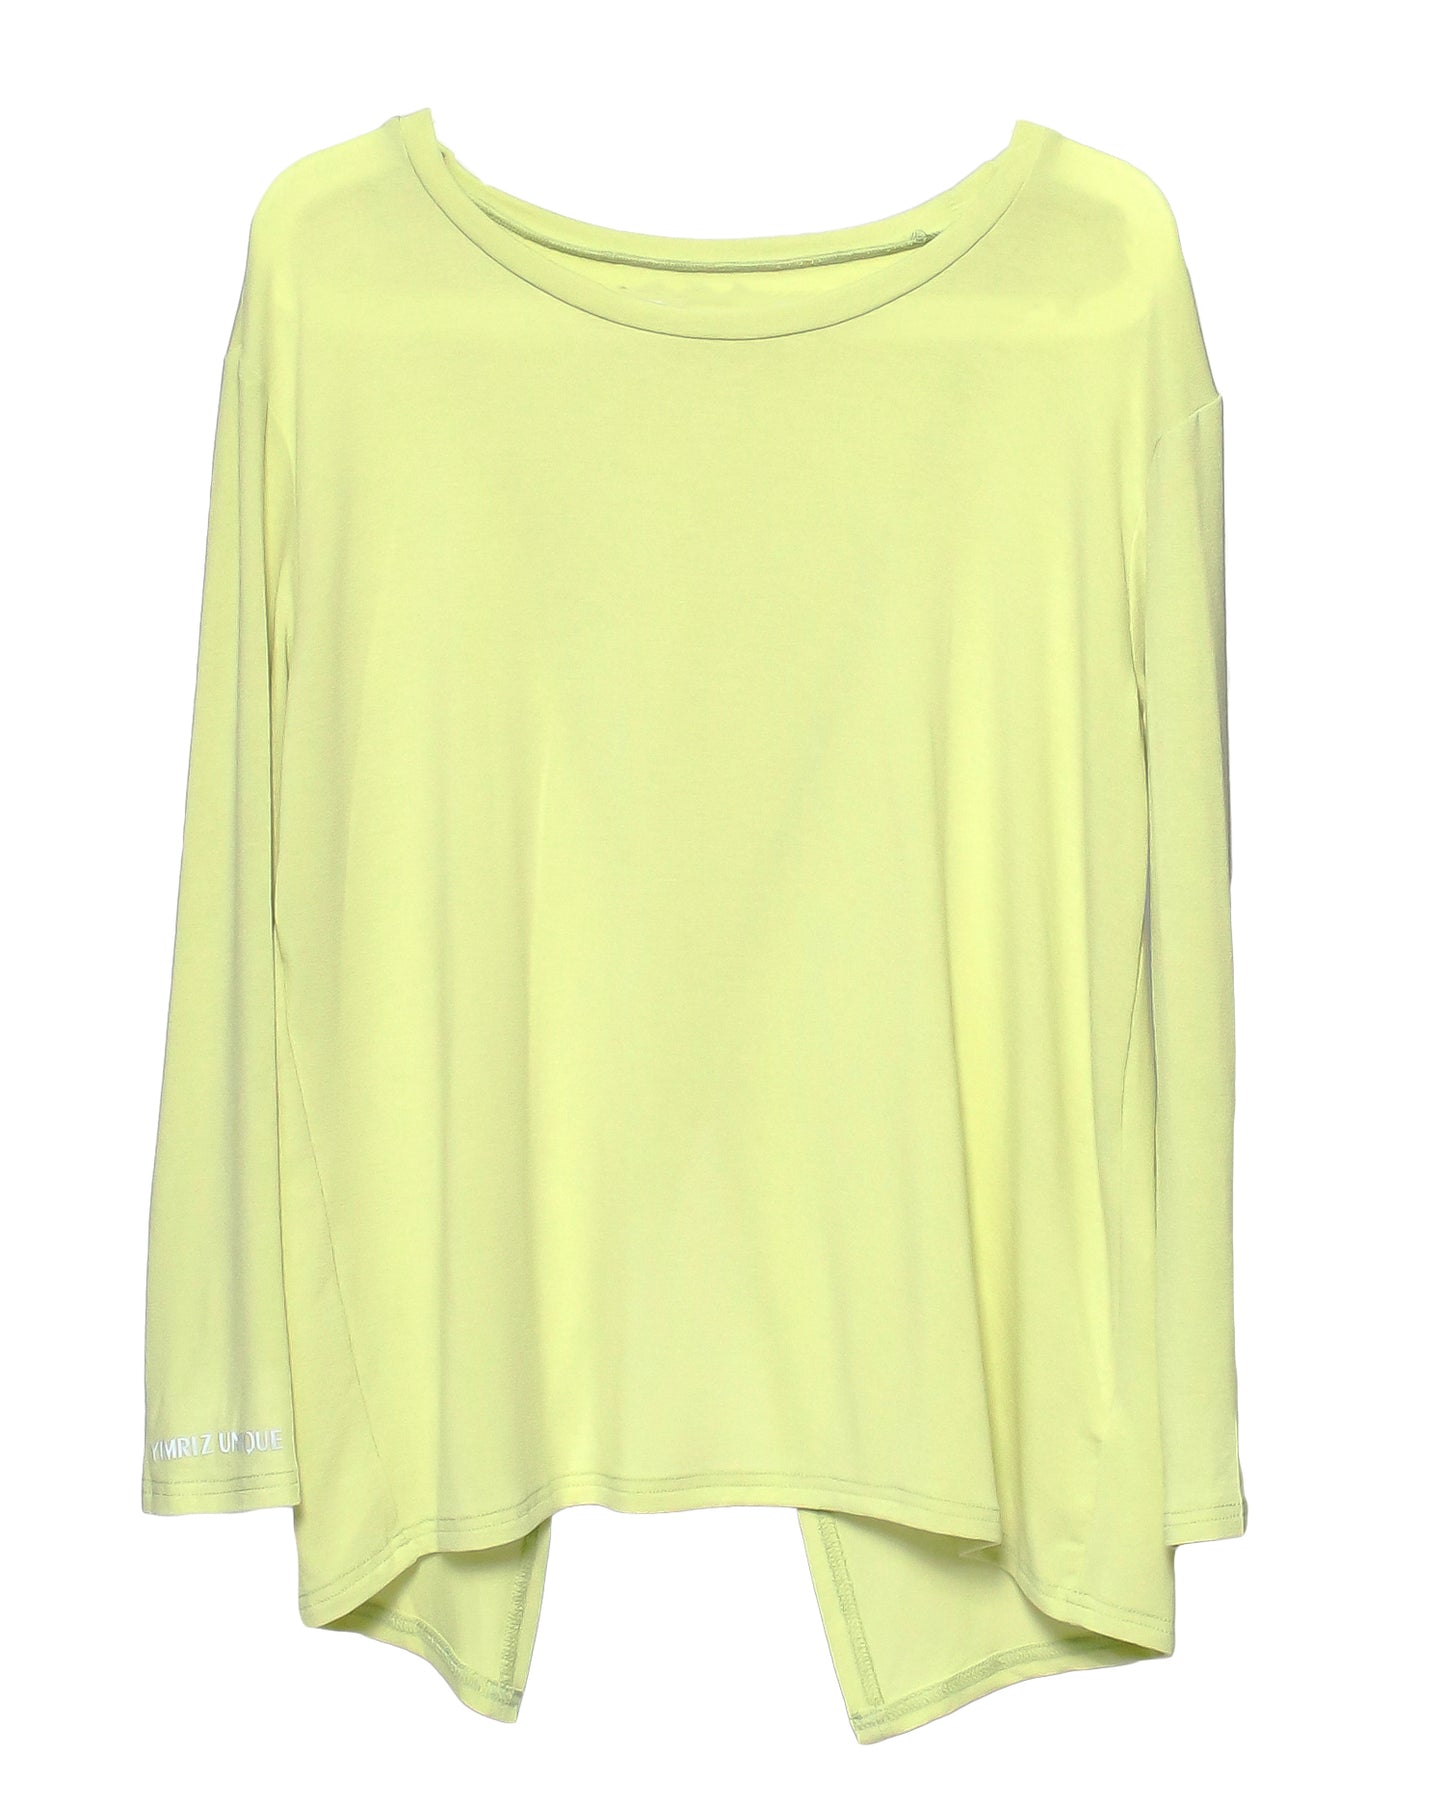 yellow sports top *pre-order*